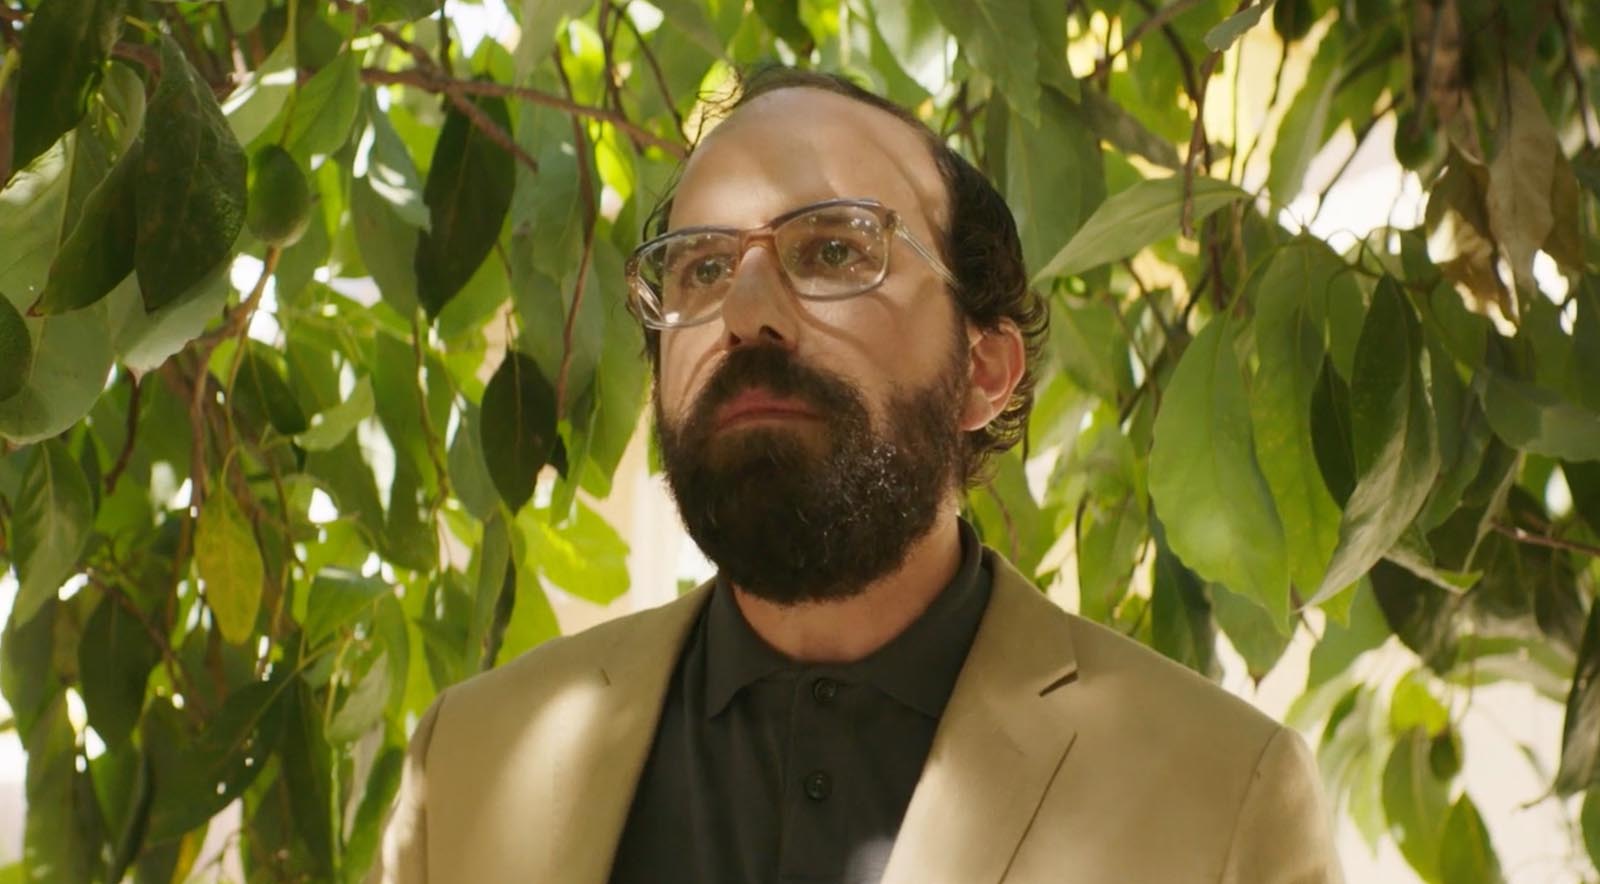 Check Out an Exclusive Scene from Janicza Bravo and Brett Gelman’s Latest Film “Lemon”